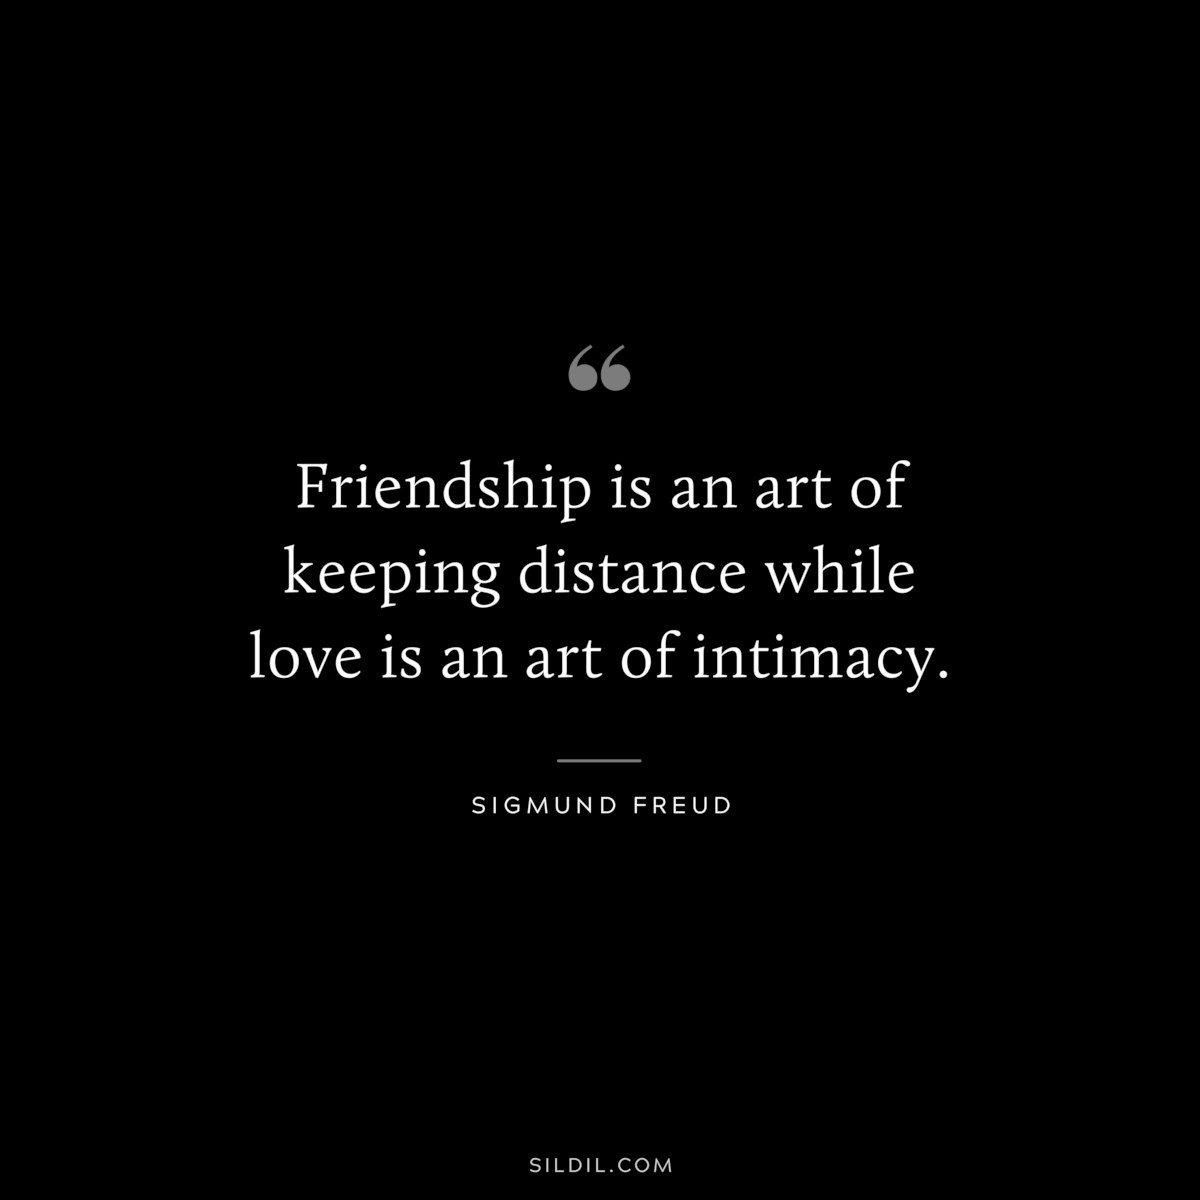 Friendship is an art of keeping distance while love is an art of intimacy. ― Sigmund Frued